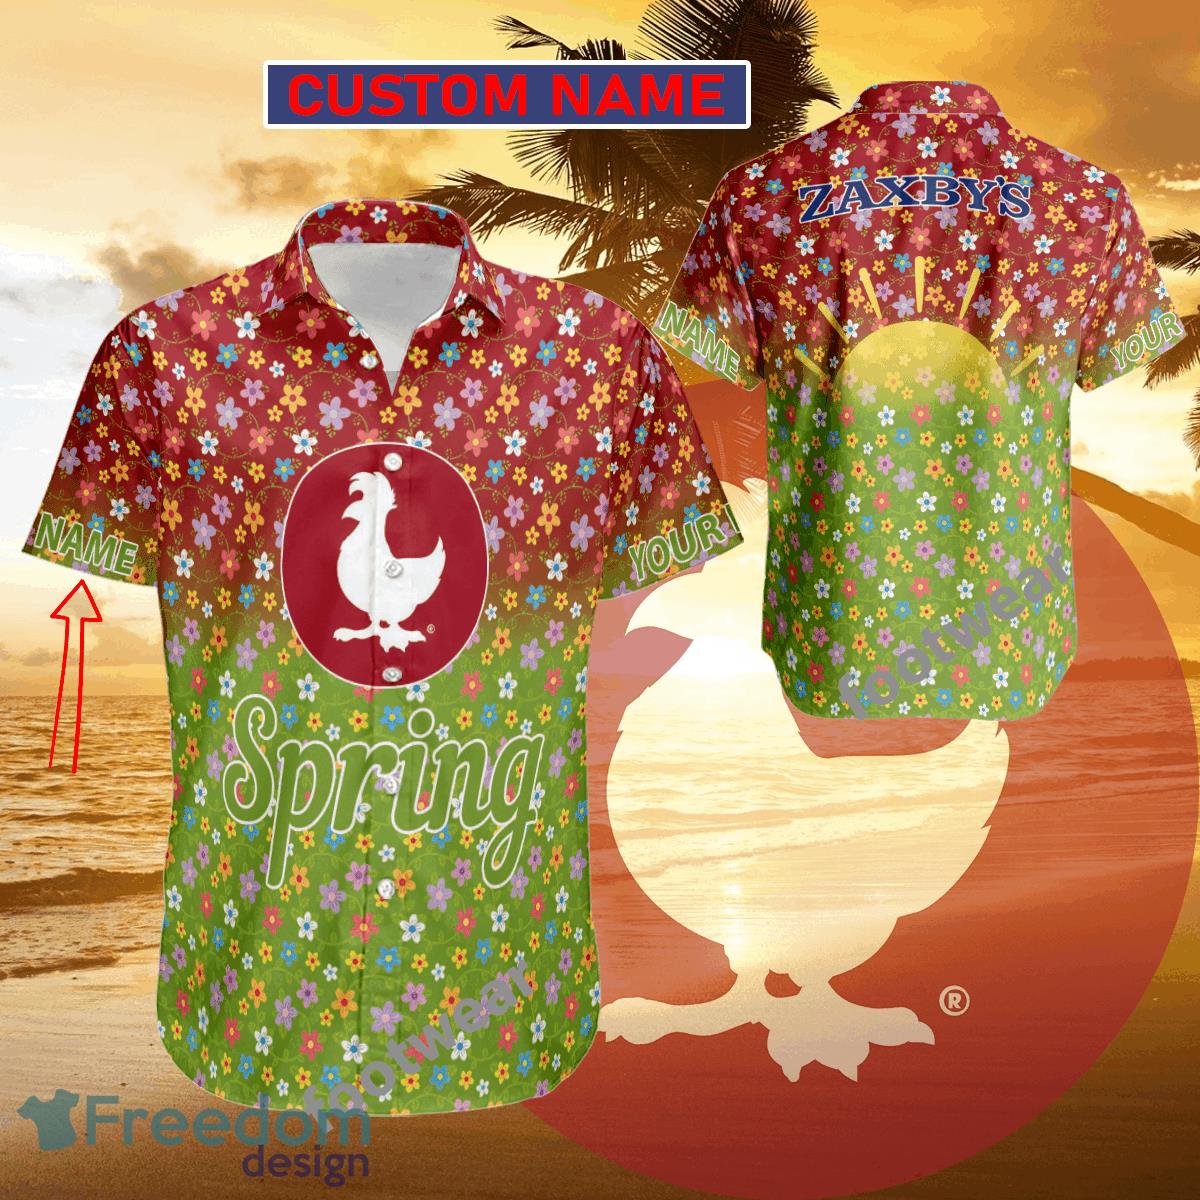 ZAXBY'S Logo Brand 3D Hawaiian Shirt New Custom Name Tropical Beach Gift For Fans - ZAXBY'S Logo Brand 3D Hawaiian Shirt New Custom Name Tropical Beach Gift For Fans